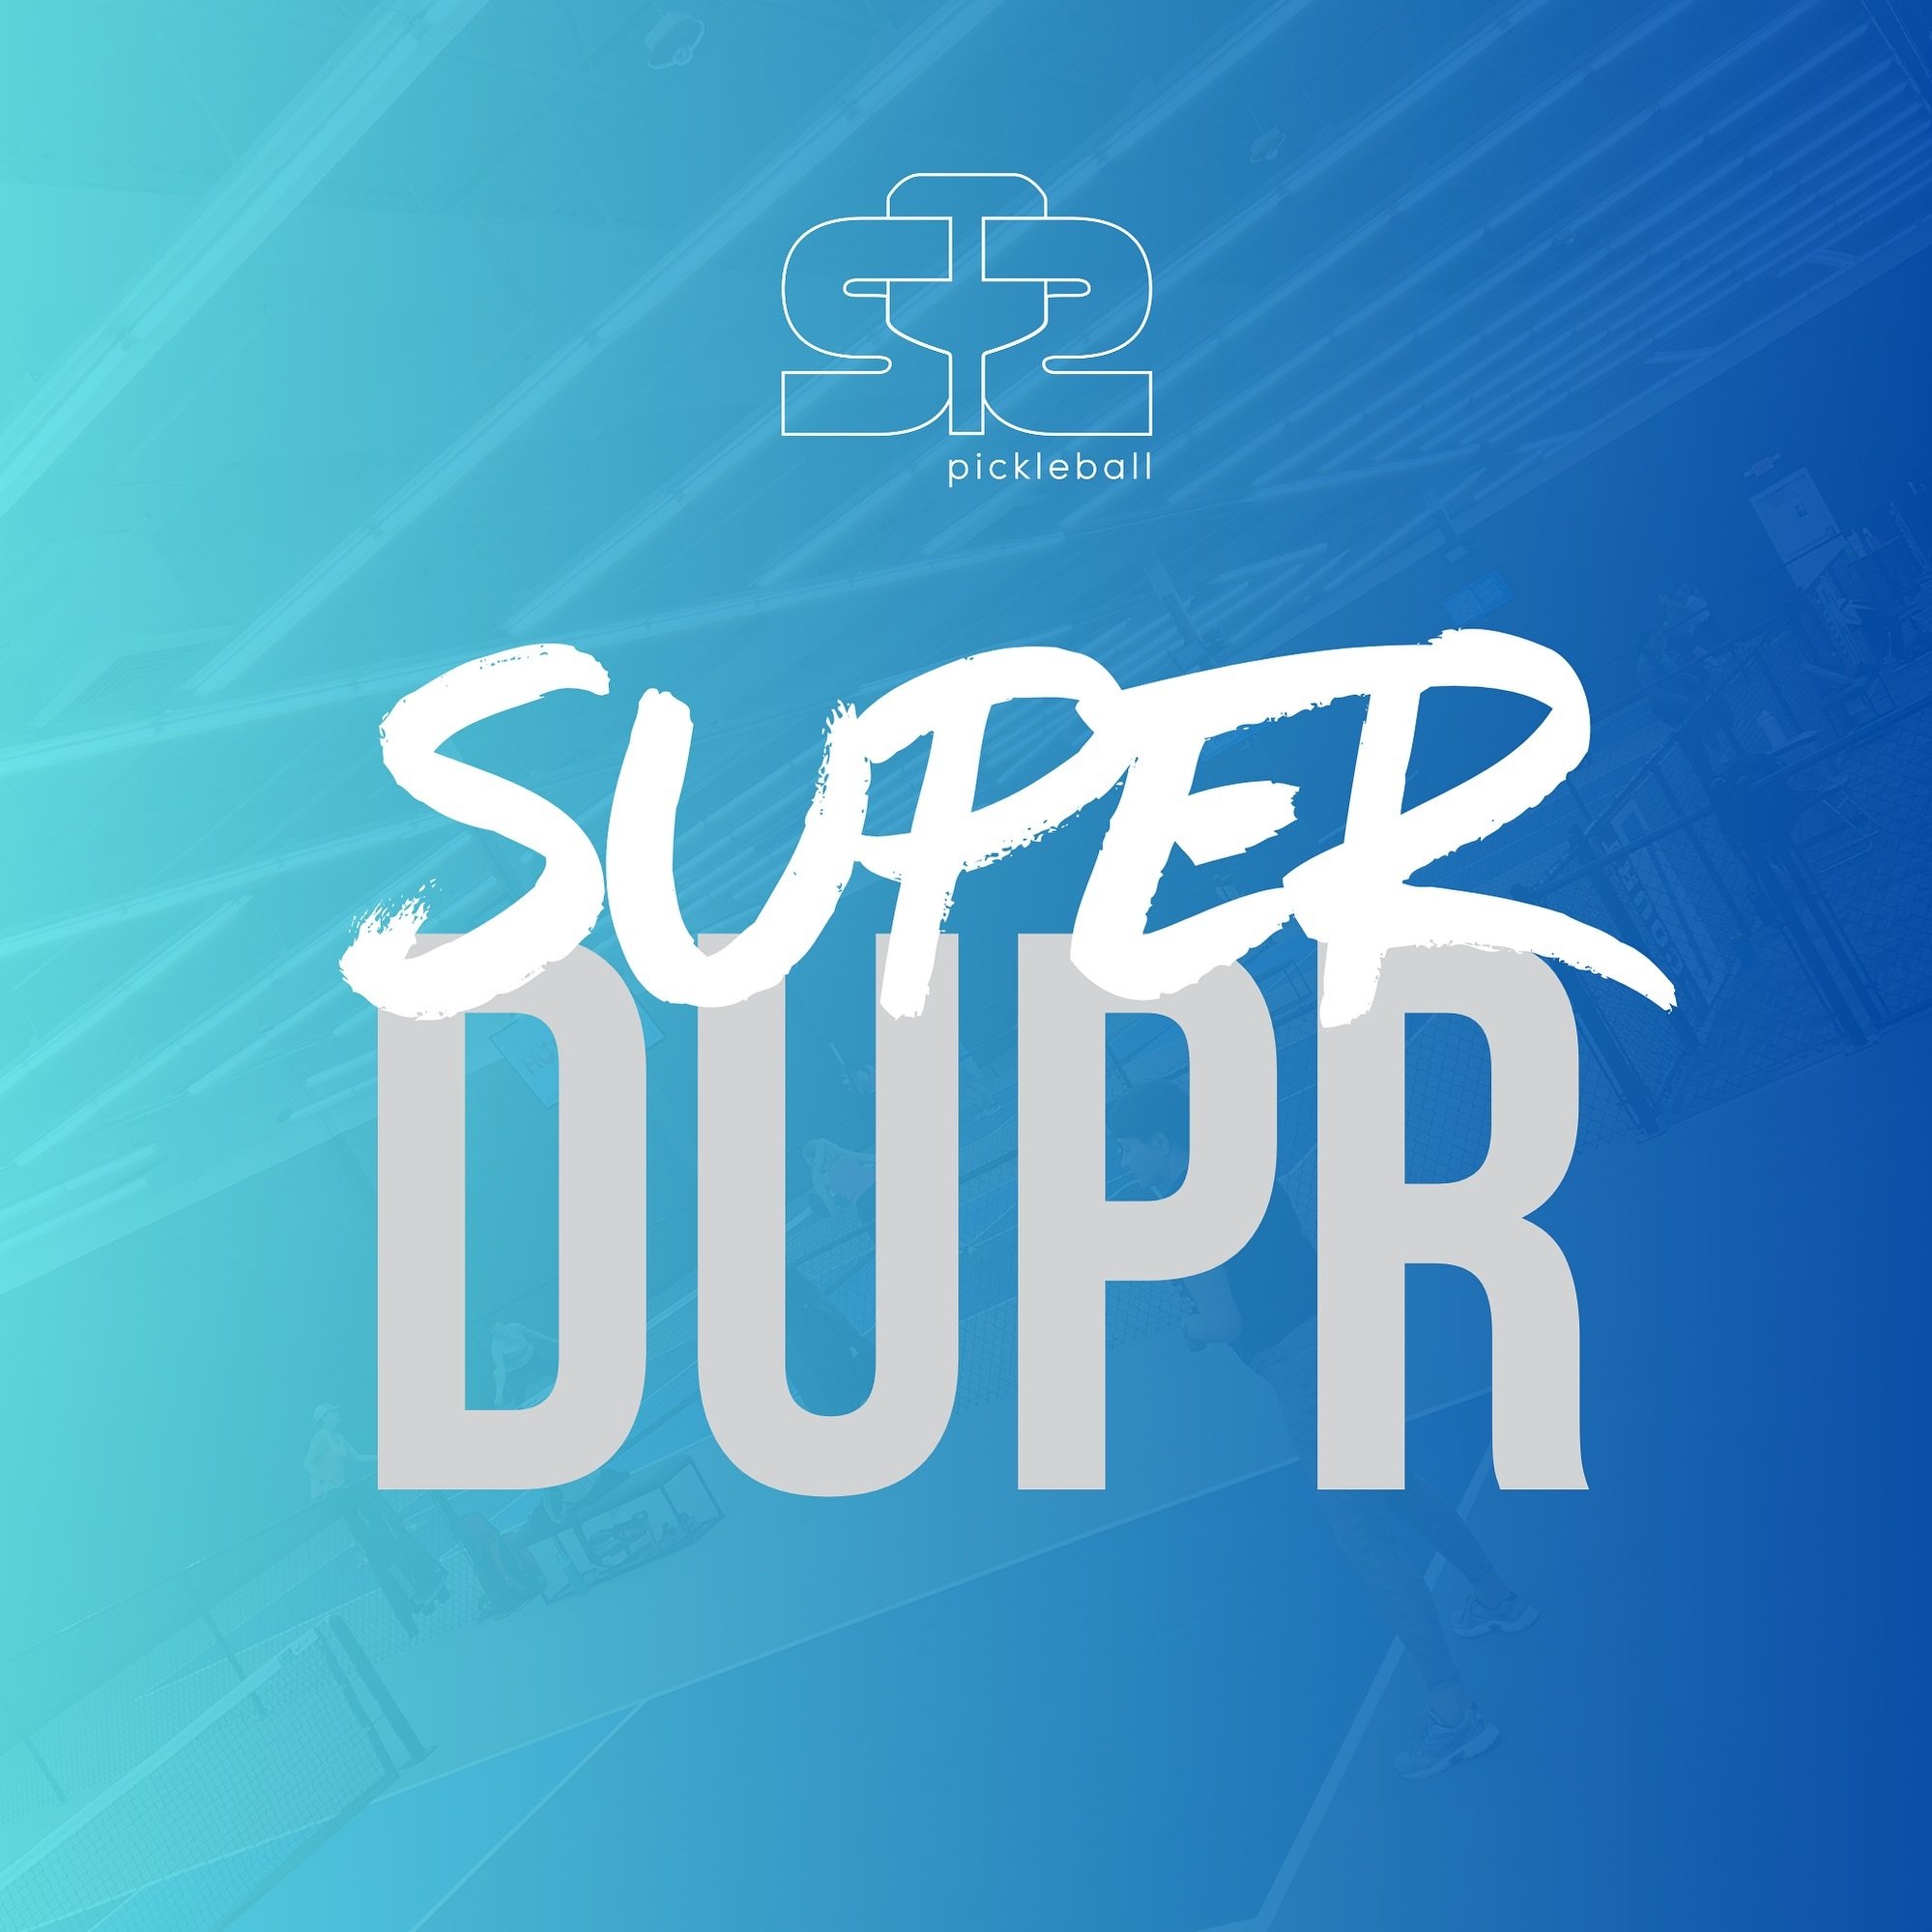 Our DUPR Derby was so fun that we have made it a permanent part of our programming! Join us for SUPER DUPR in May on Wednesdays 6:30 p.m. - 8:30 p.m.
.
MAY 1 : 3.0
.
MAY 8 : 3.5
.
MAY 15 : 4.0
.
MAY 22 : 4.5
.
Come for a night of round robin DUPR gam